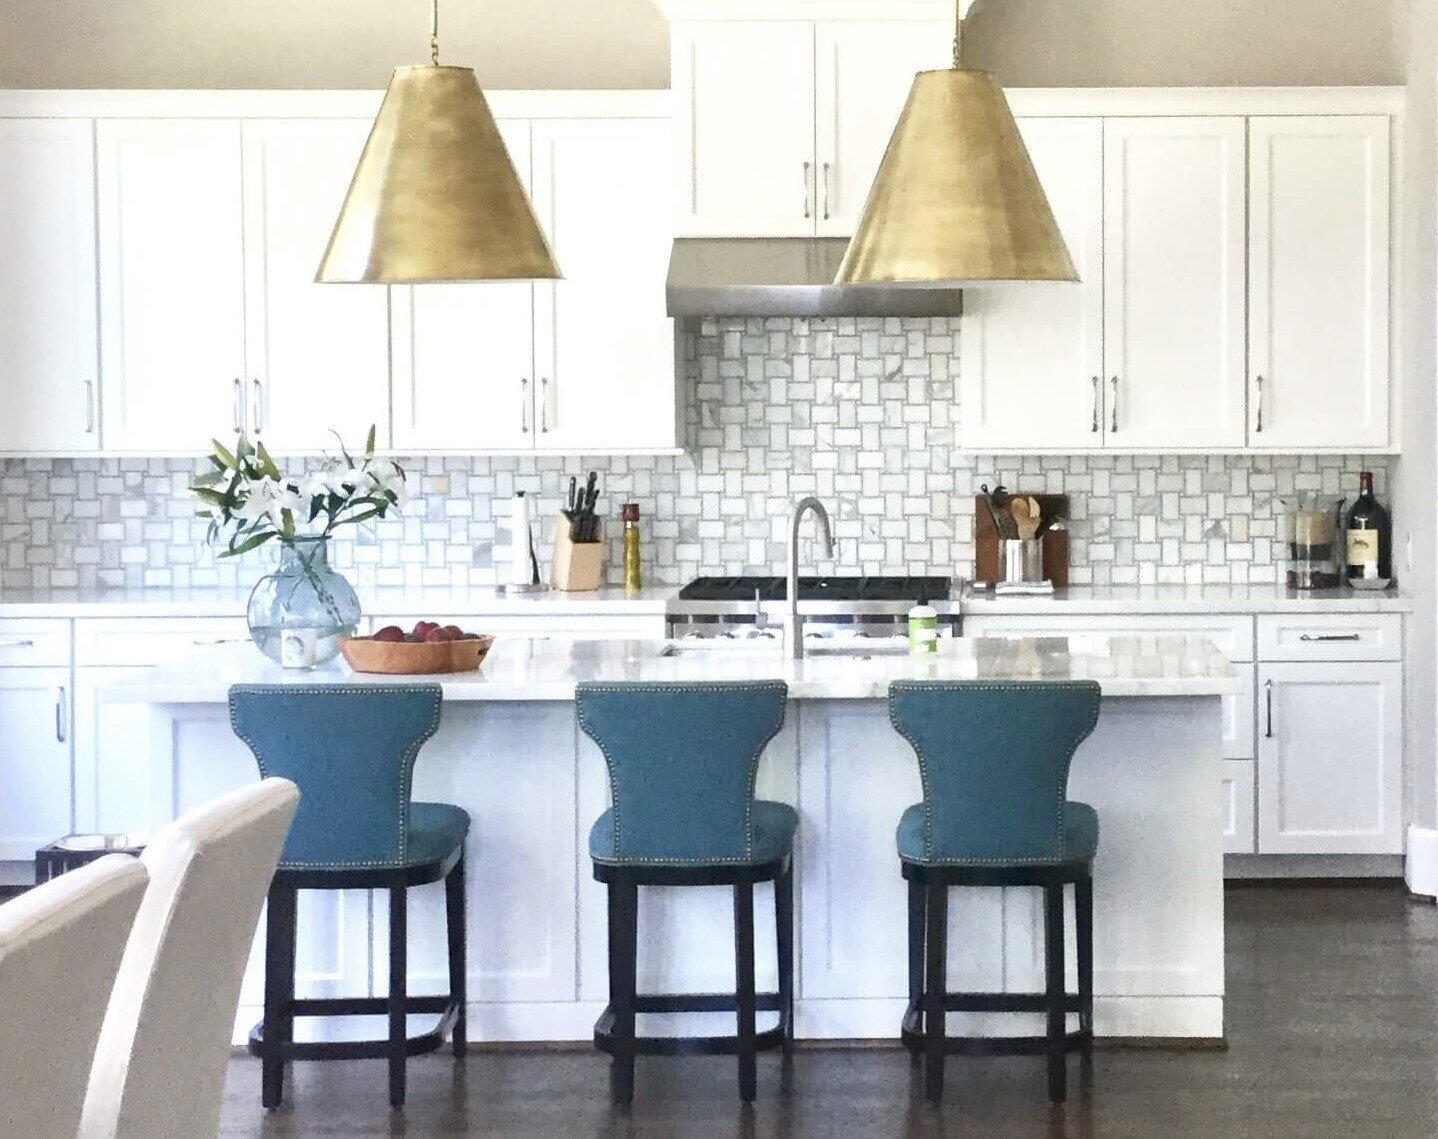 Mixing Metal Finishes: Should Light Fixtures Match Hardware? — DESIGNED